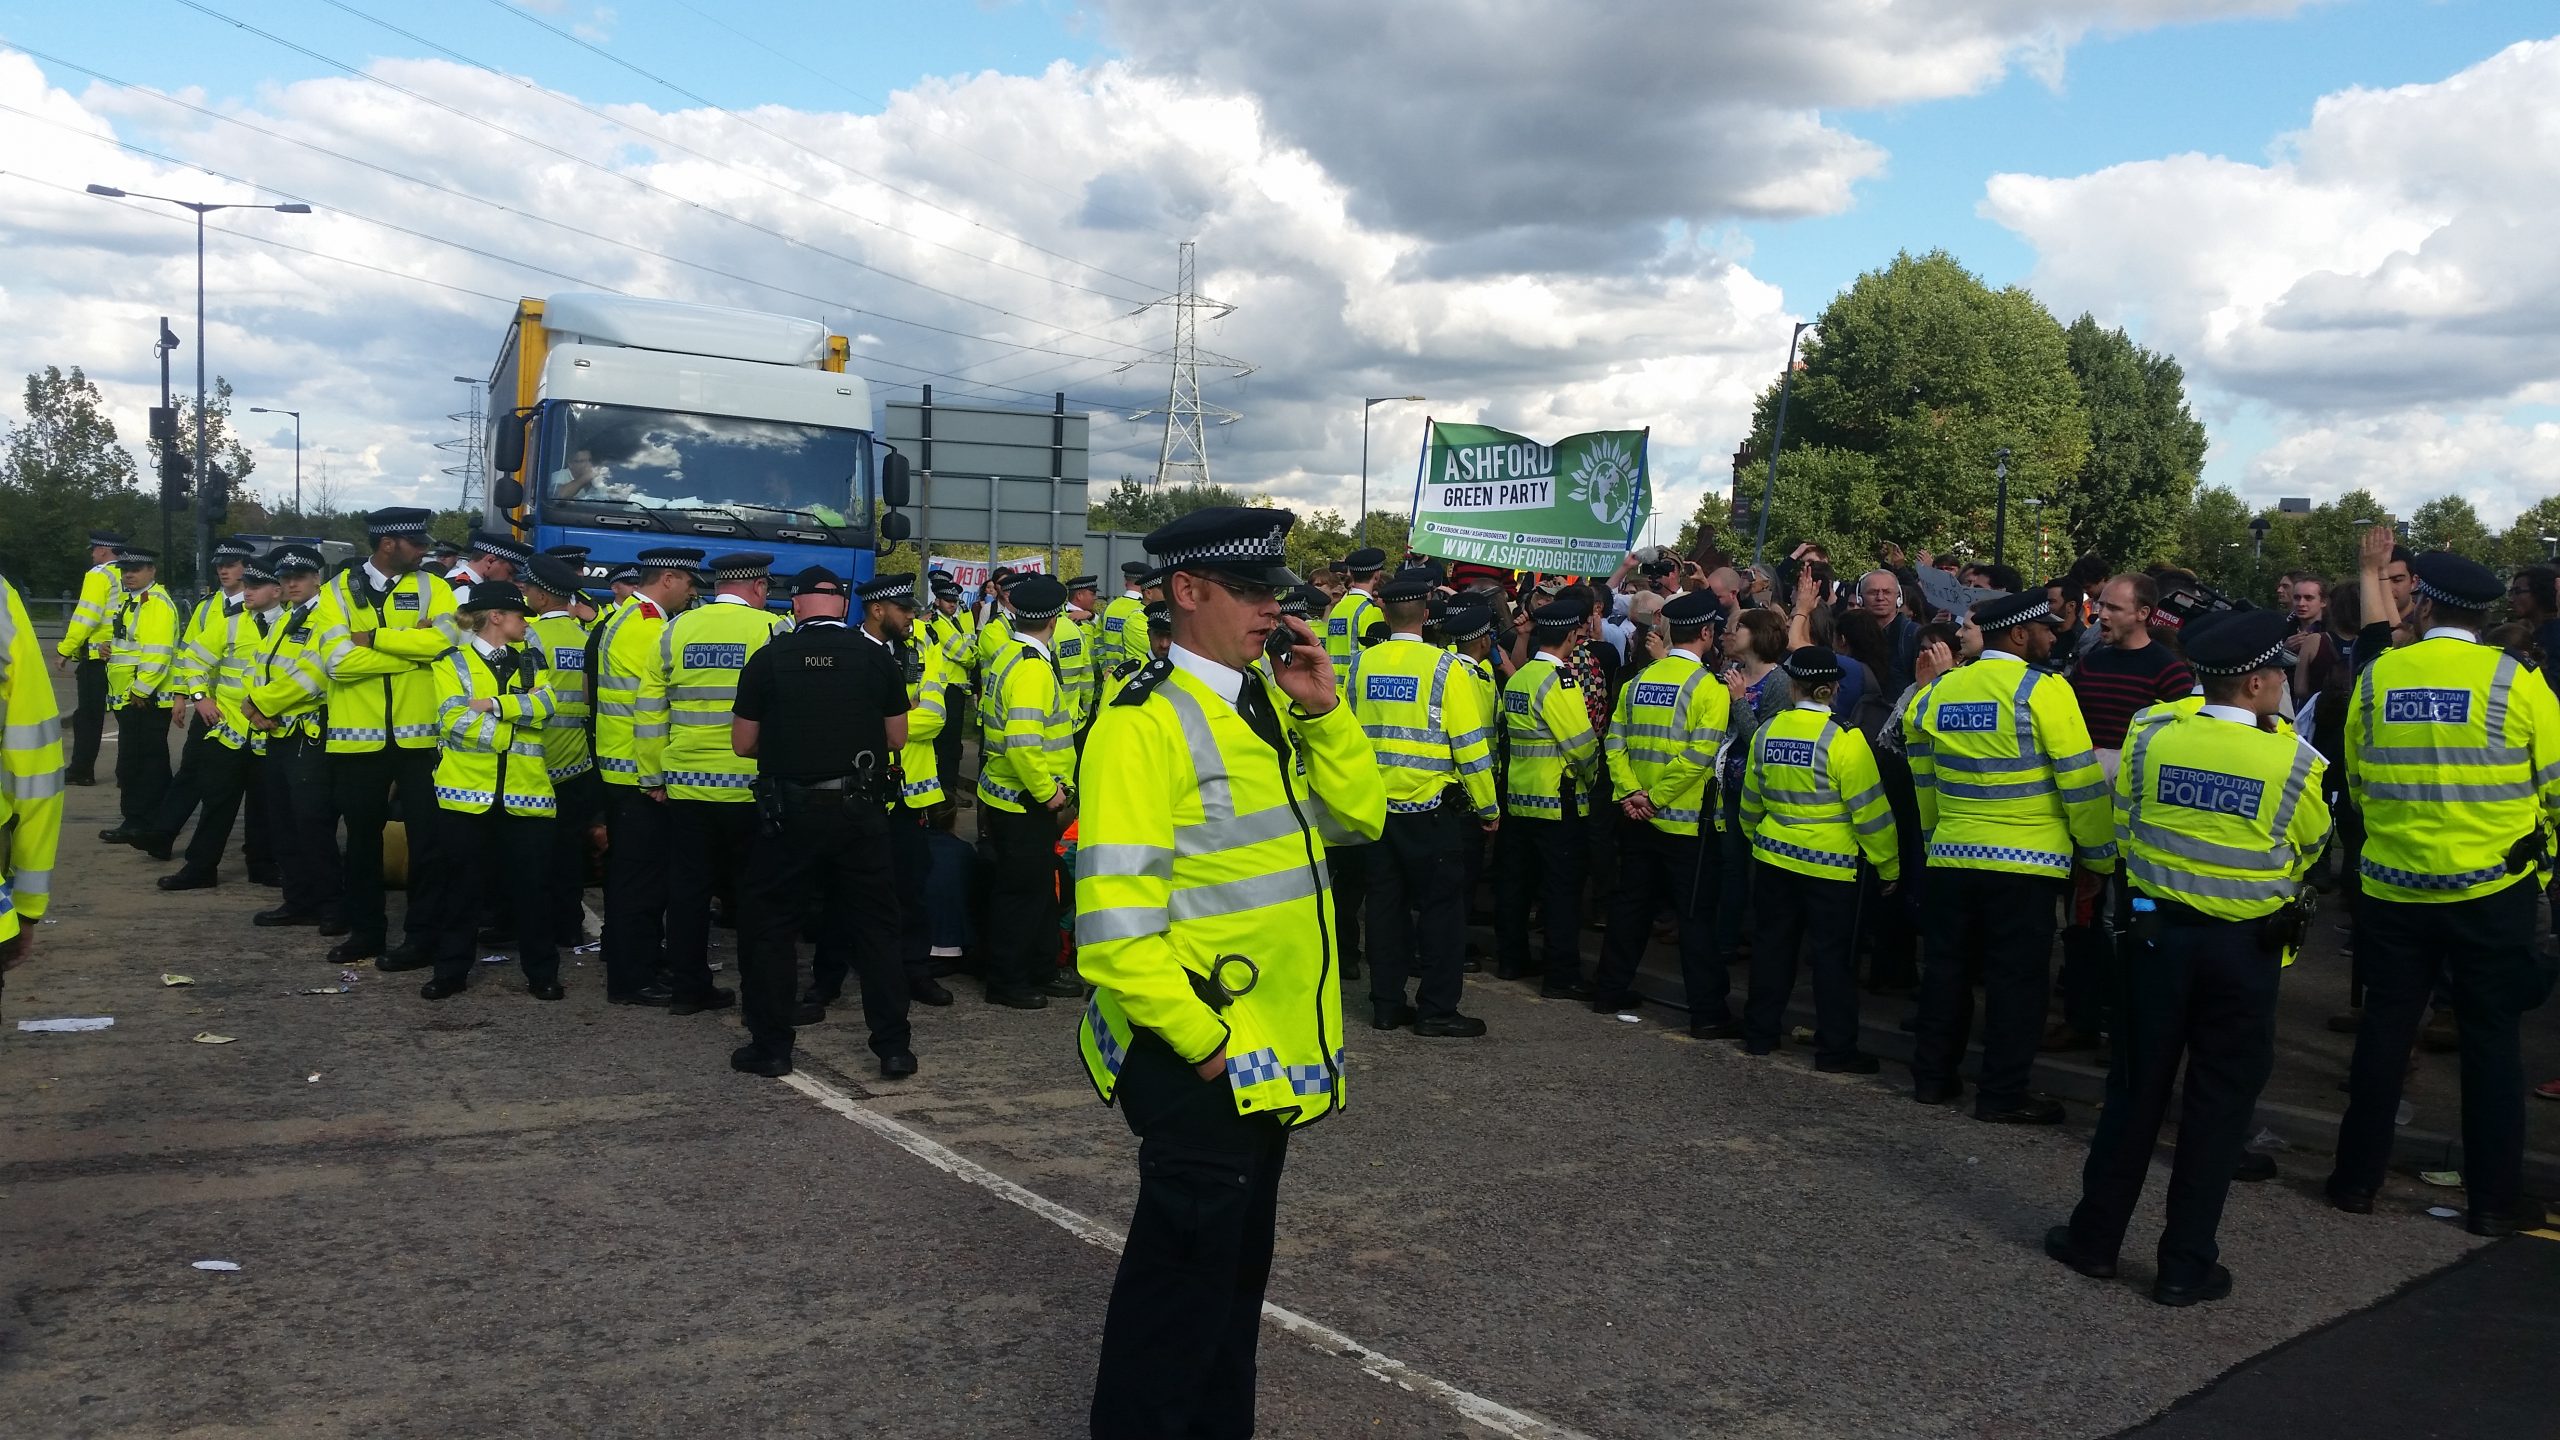 A line of police stand in front of an HGV lorry